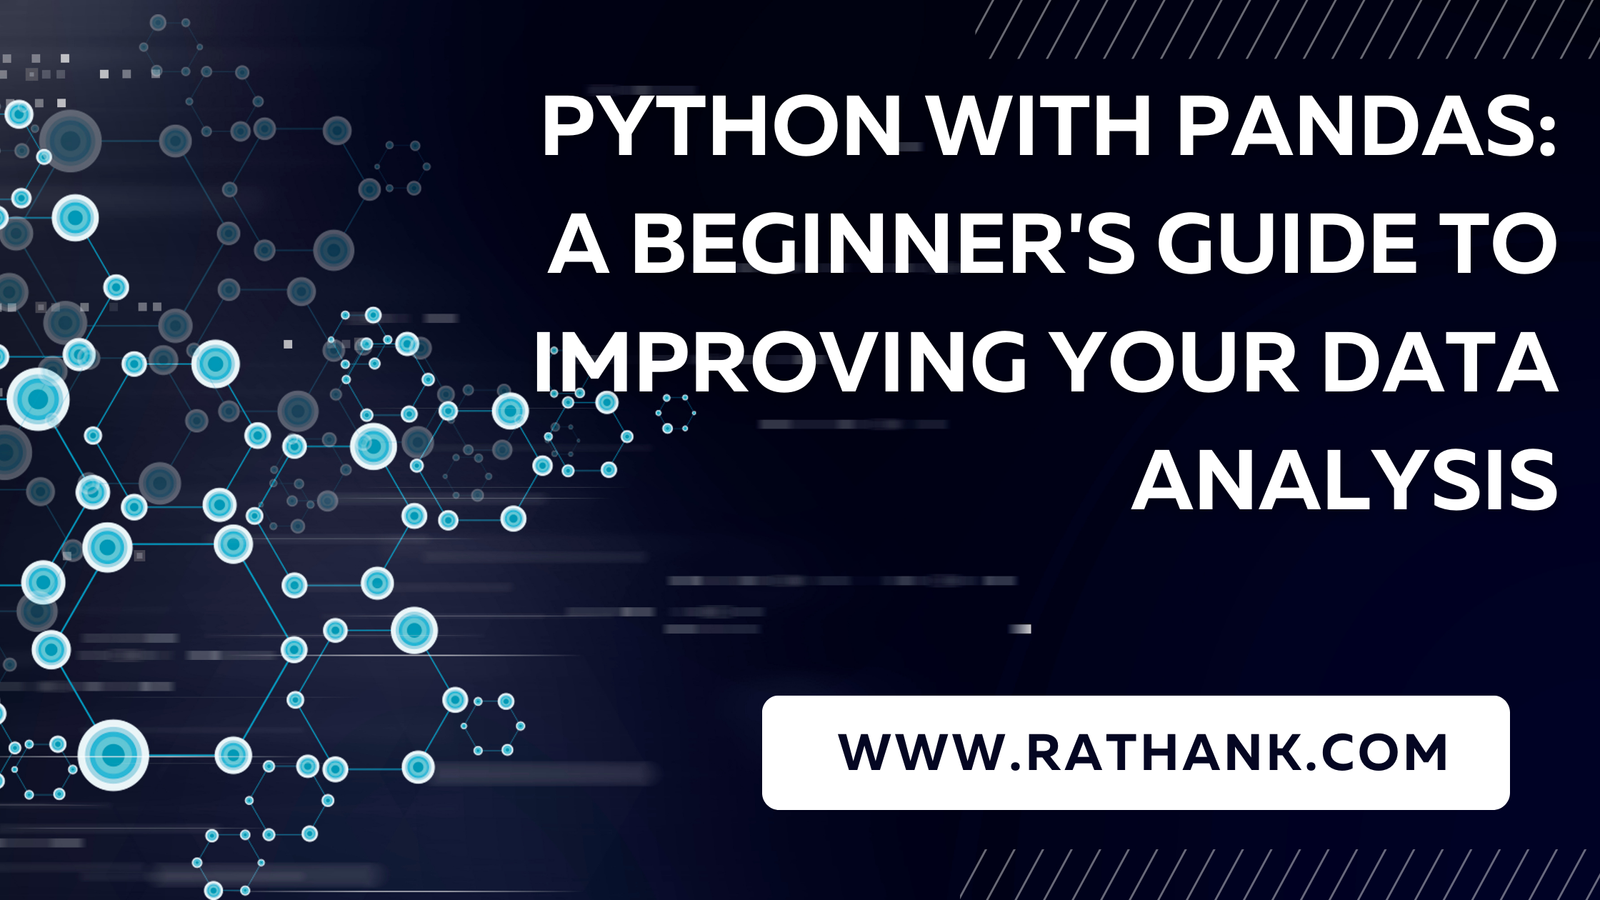 Python with Pandas: A Beginner's Guide to Improving Your Data Analysis